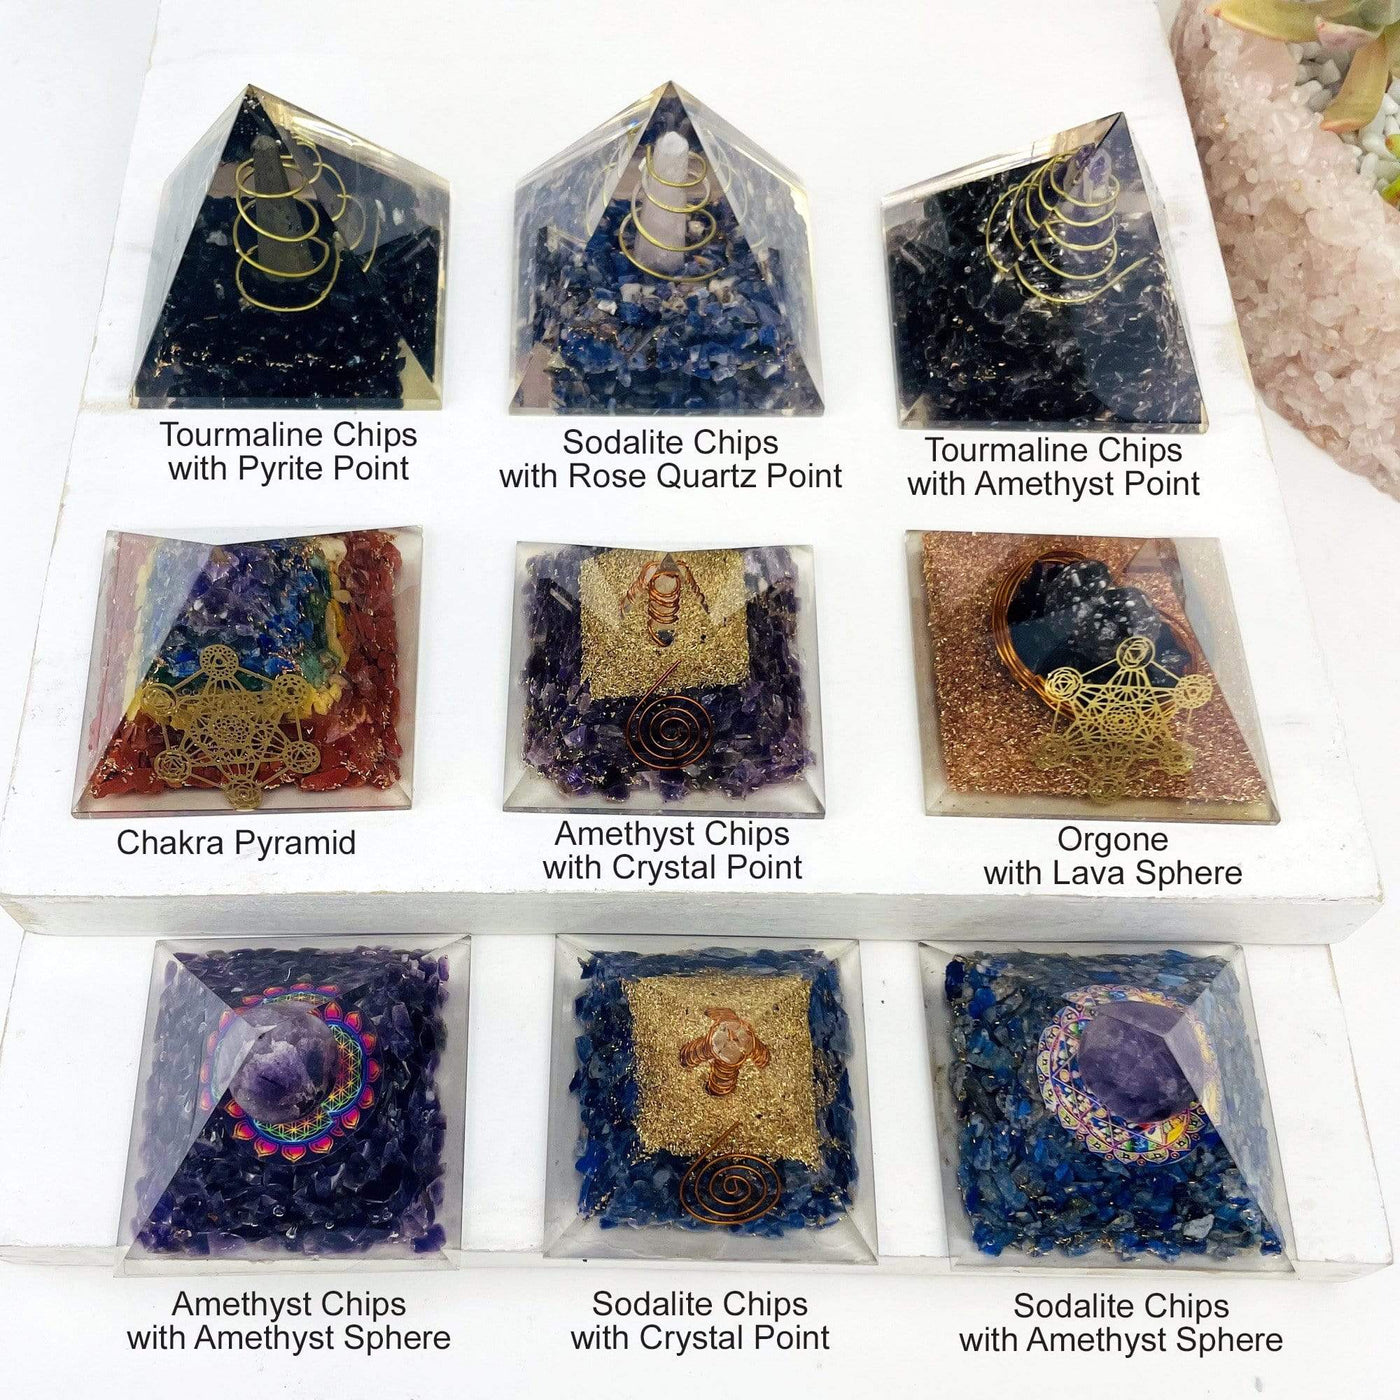 pyramids displayed to show gemstone variations in tourmaline chips with pyrite point sodalite chips with rose quartz point tourmaline chips with amethyst point chakra pyramid amethyst chips with crystal quartz point orgone with lava sphere amethyst chips with amethyst sphere sodalite chips with crystal point sodalite chips with amethyst sphere